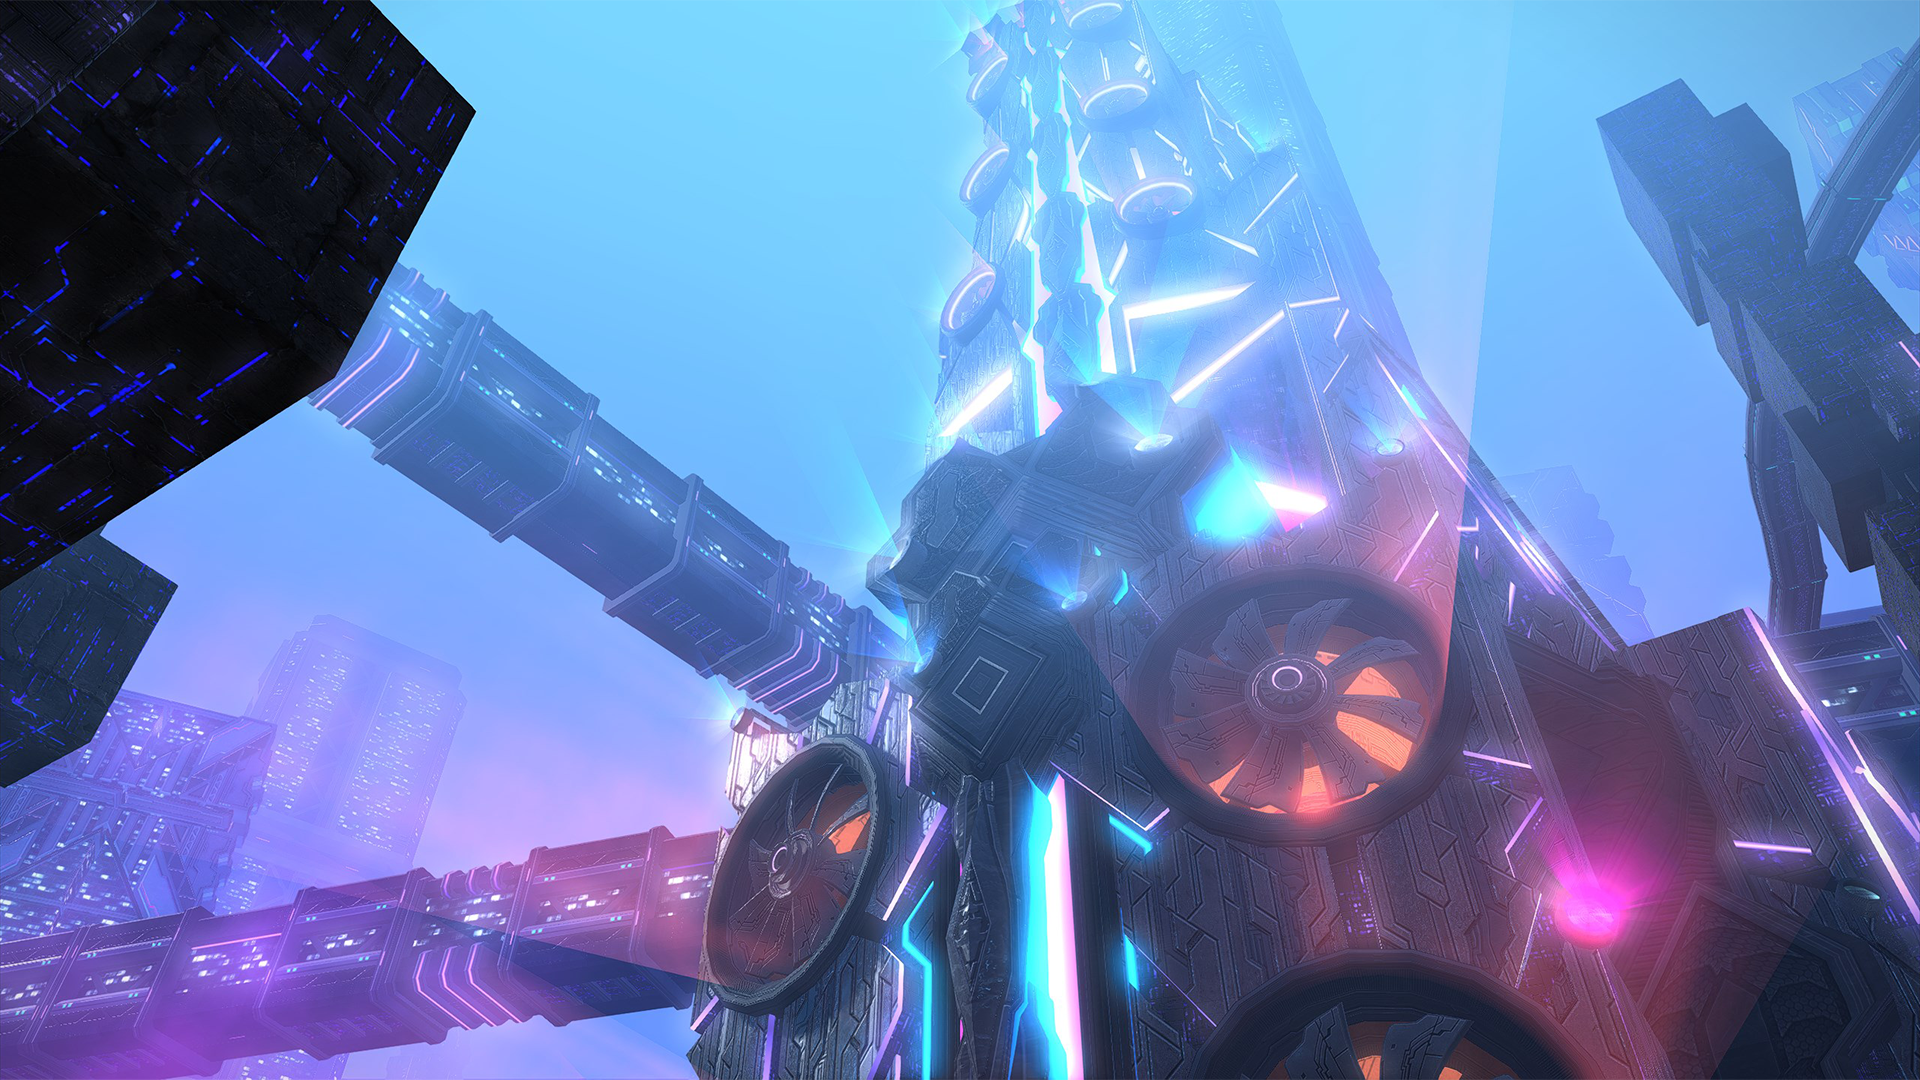 The Arcadion in FFXIV, which looks like a giant GPU with RGB fans, but as a tower